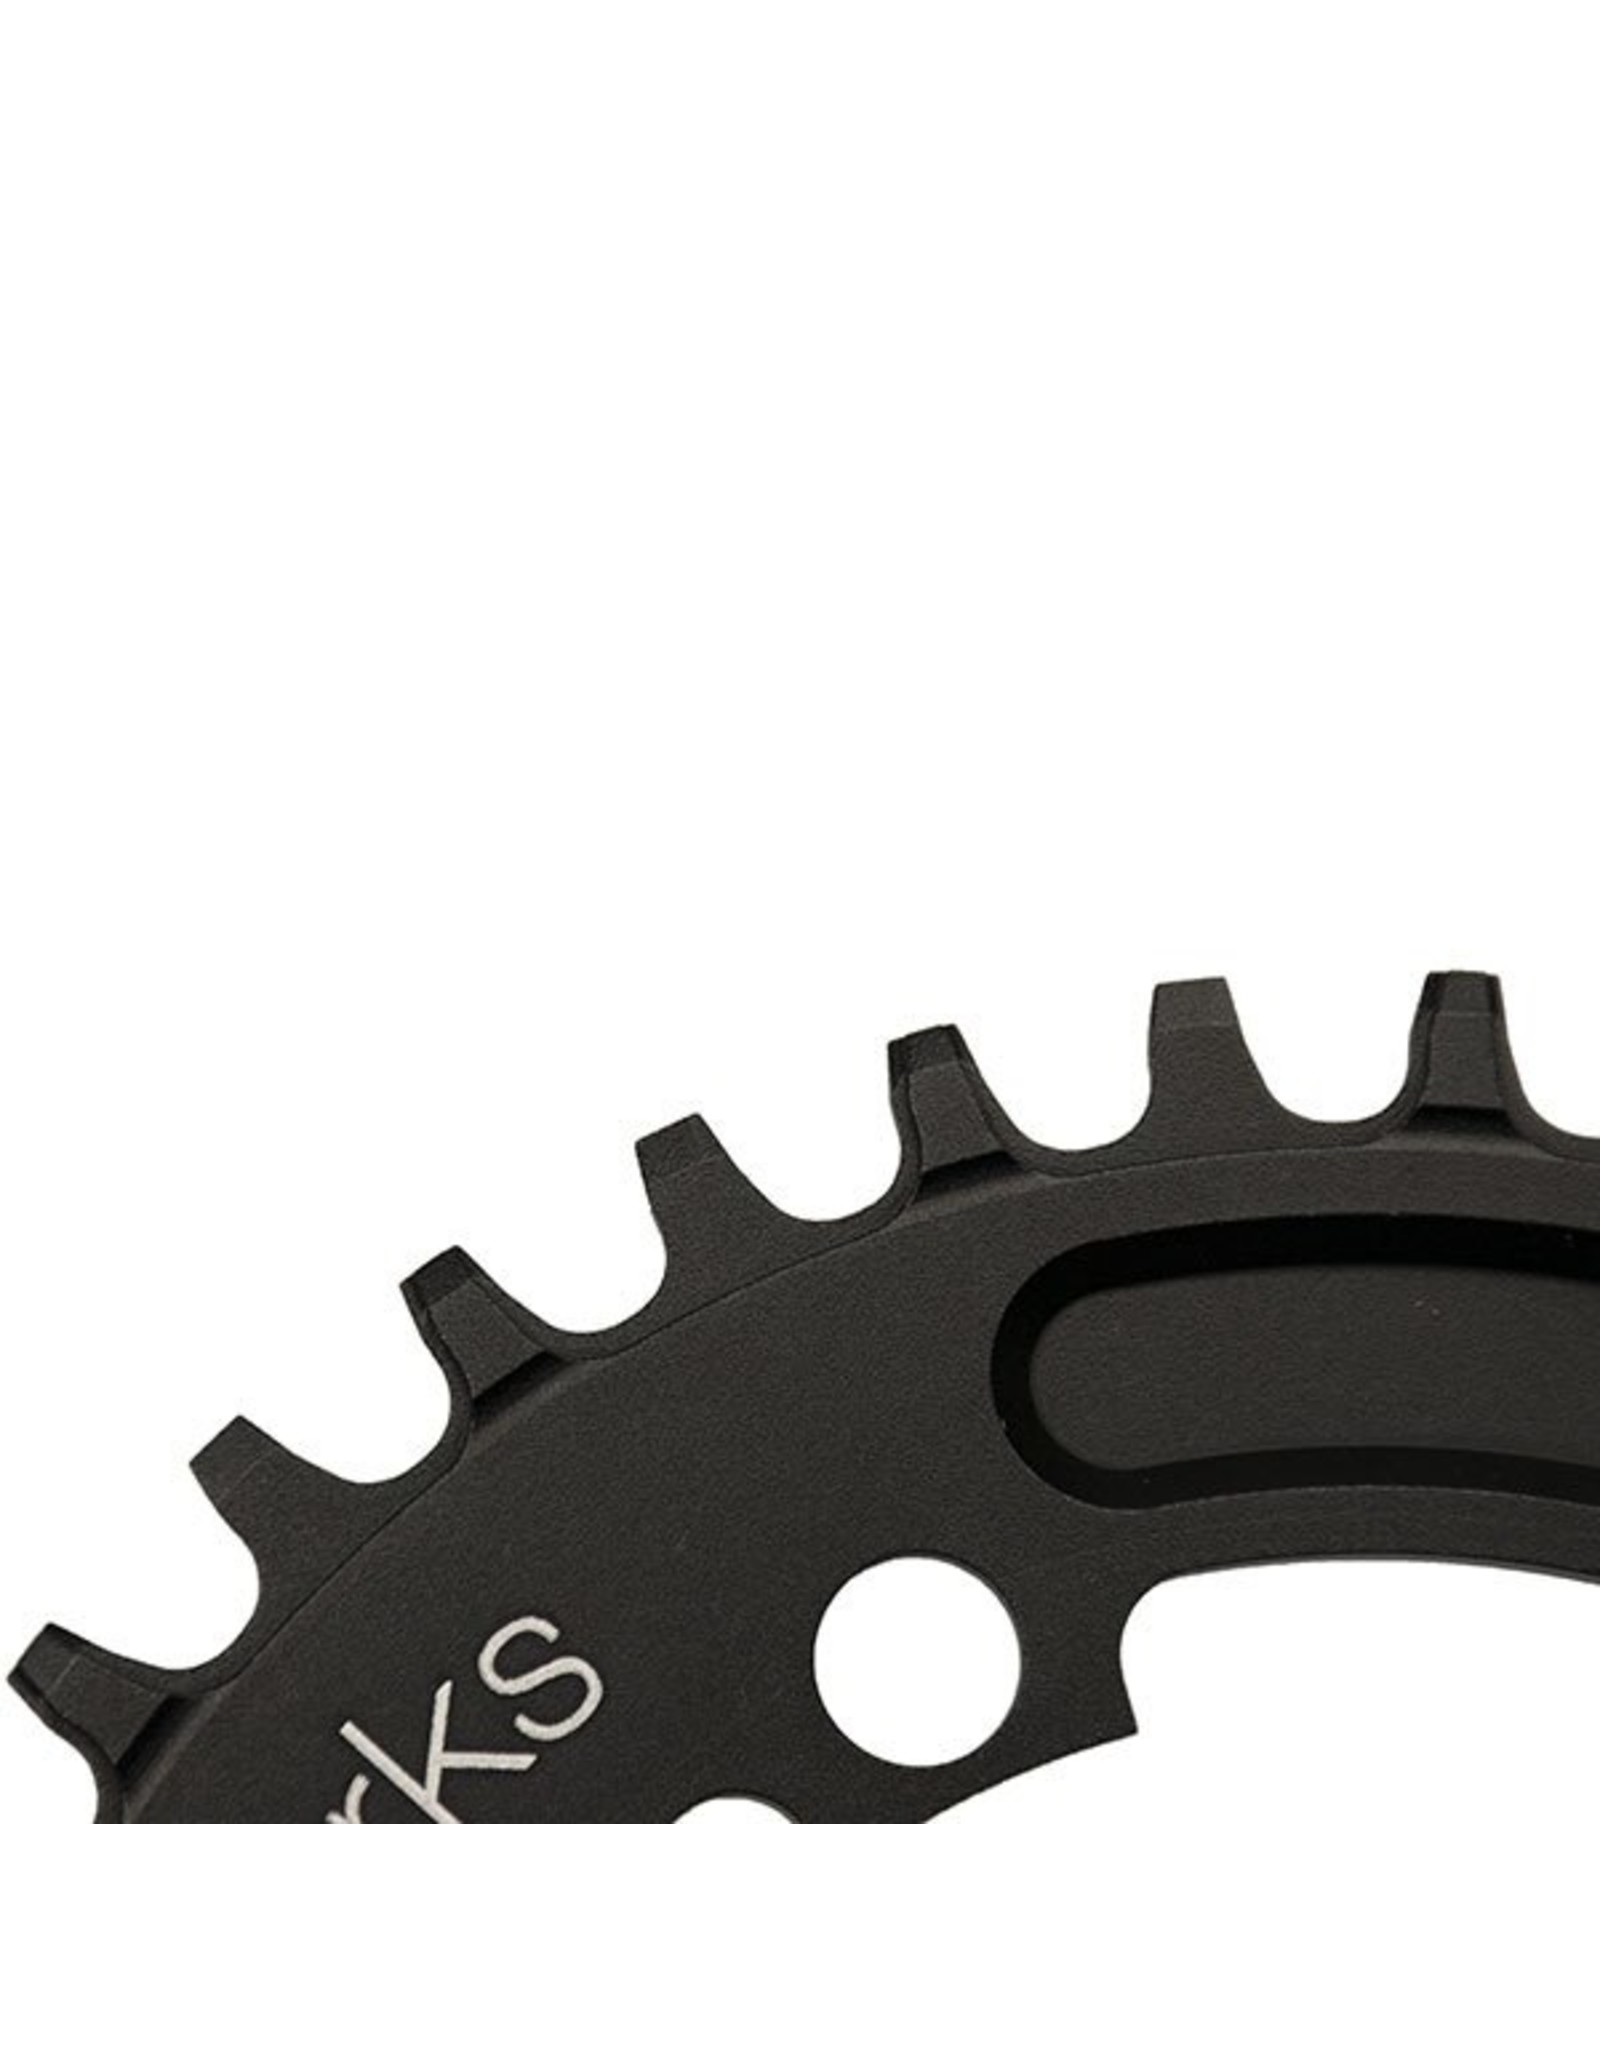 Praxis Works Praxis Wave 1x 104 BCD Mountain Chainring